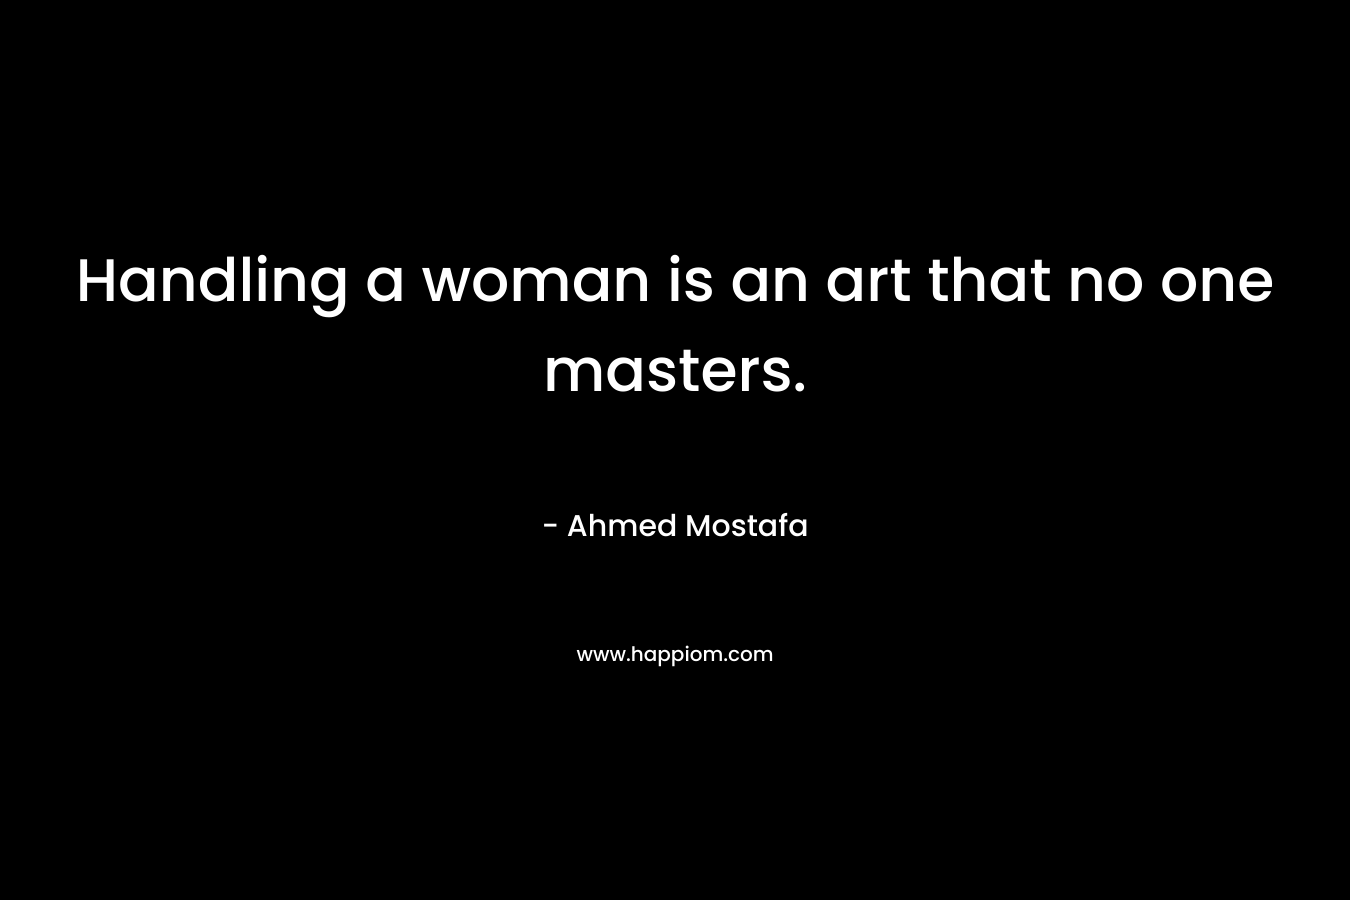 Handling a woman is an art that no one masters. – Ahmed Mostafa